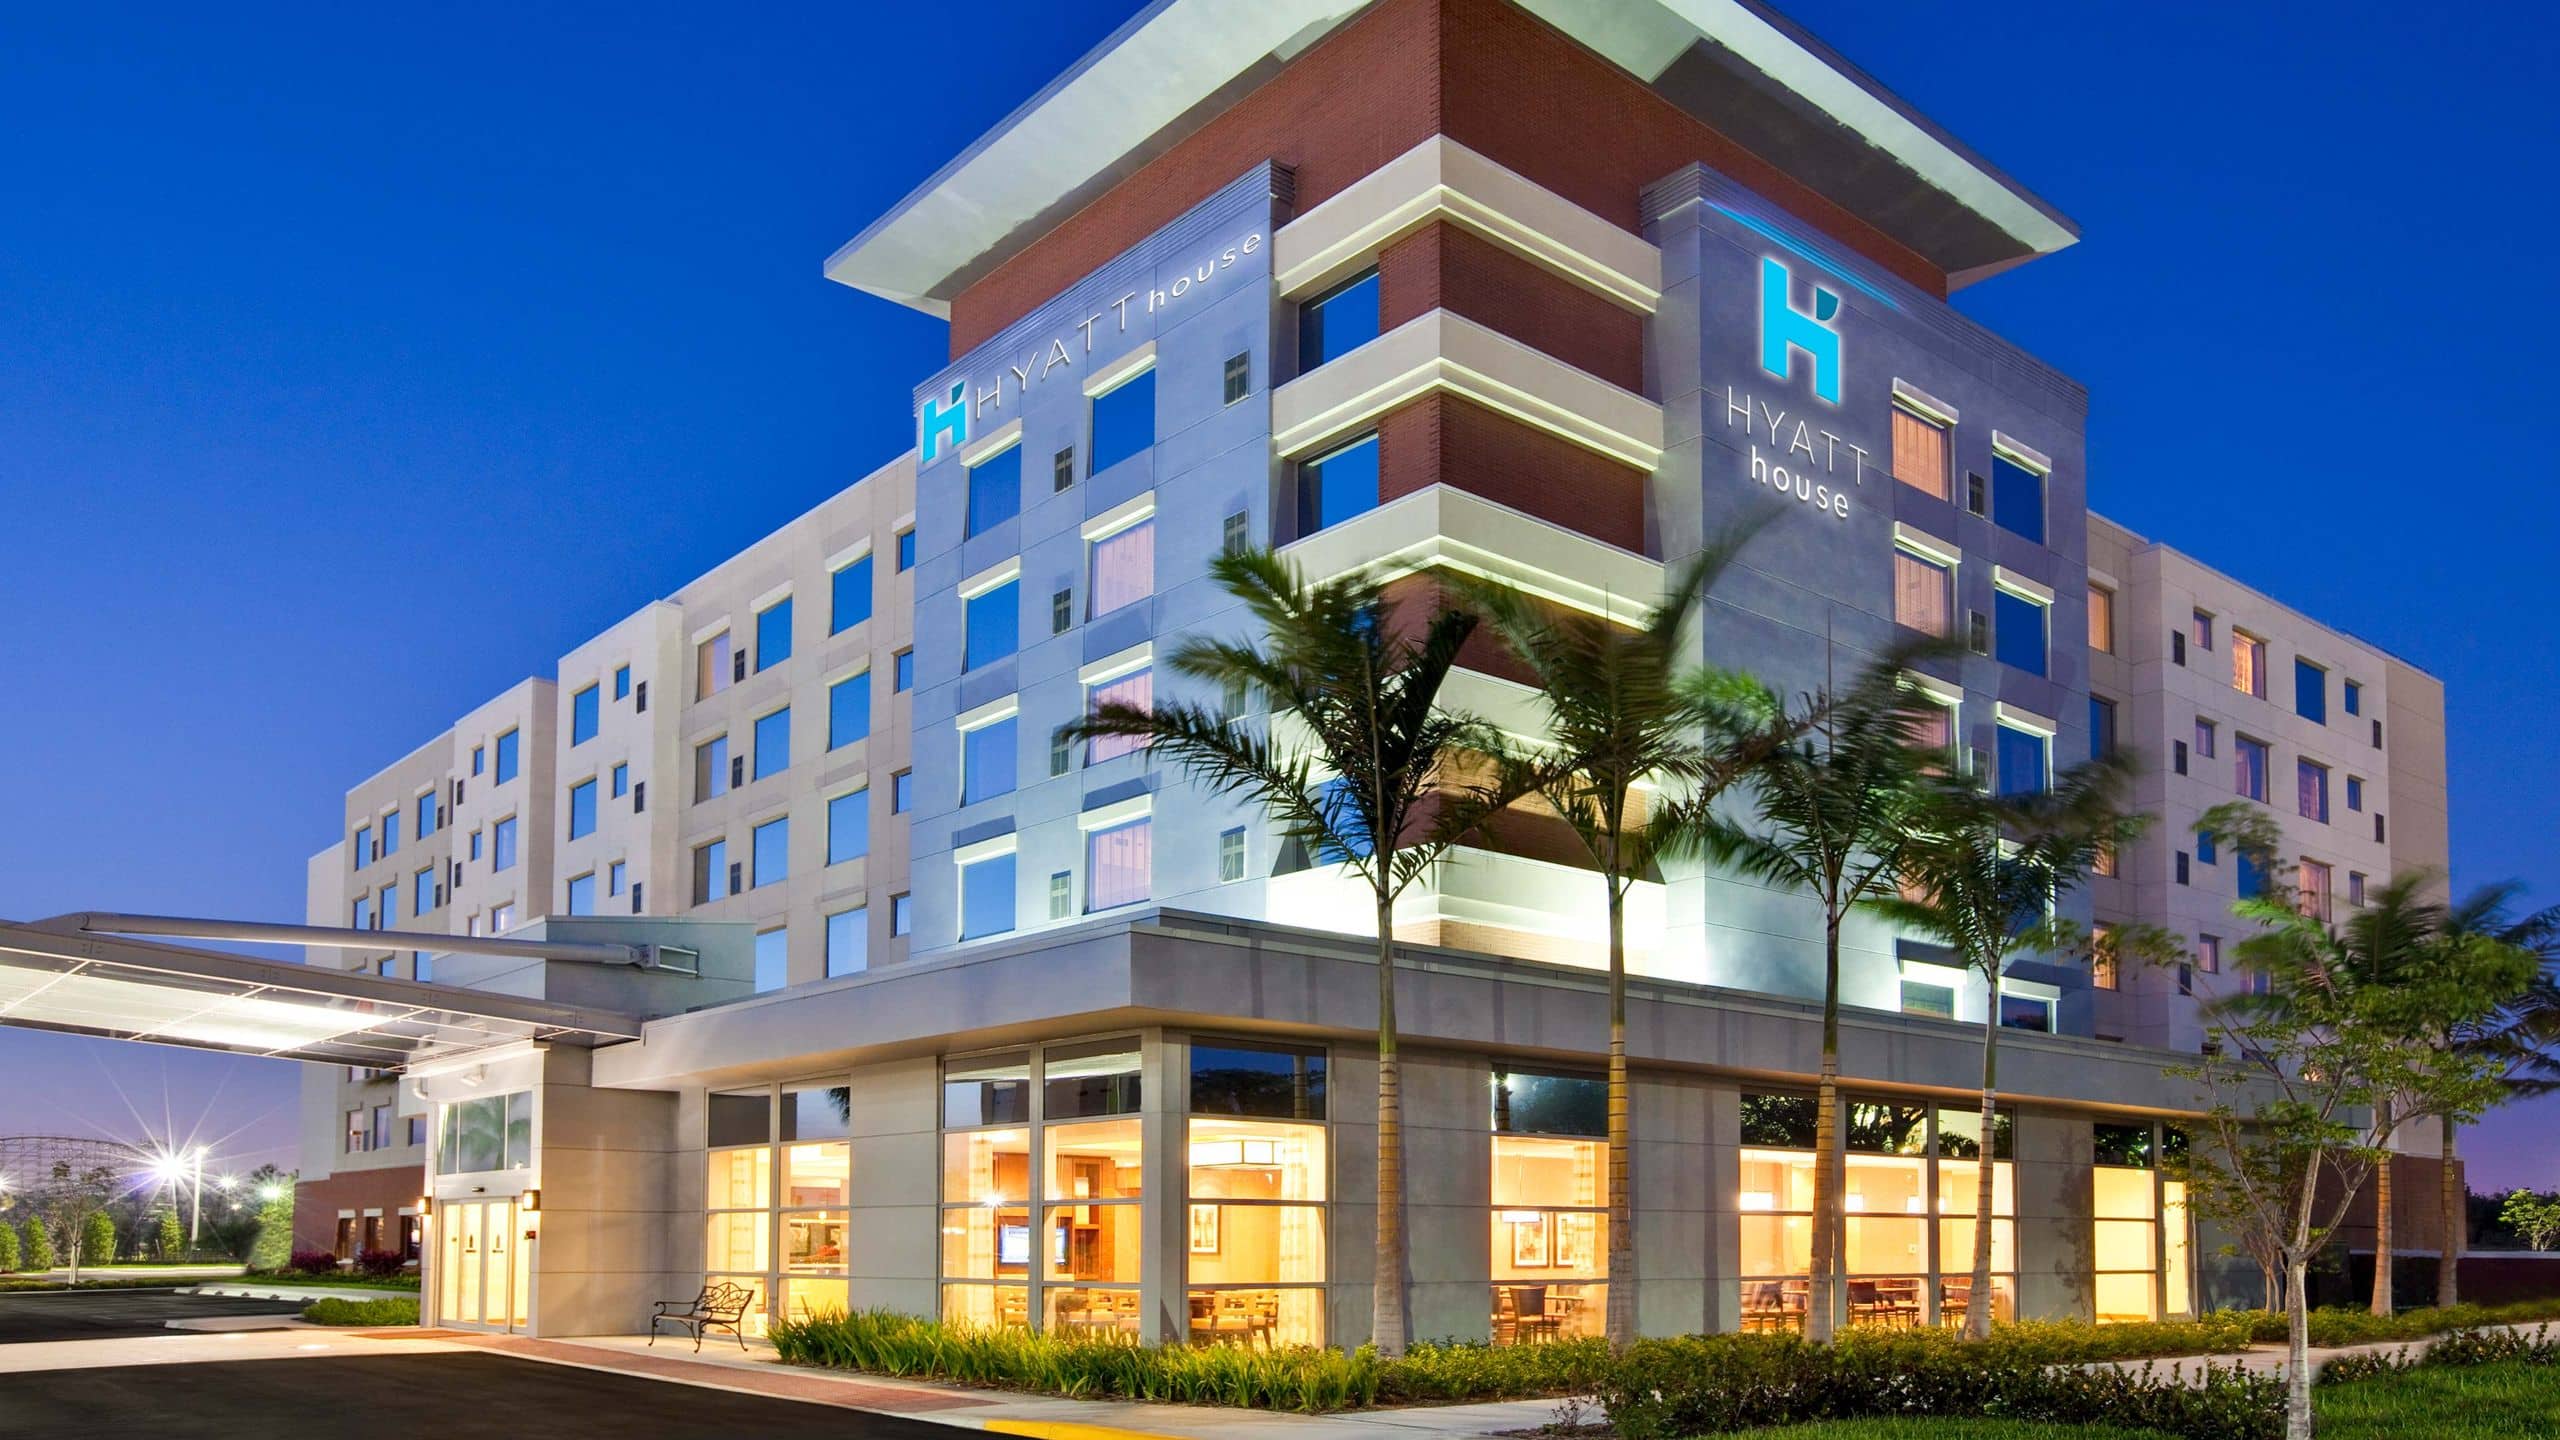 Hyatt House Fort Lauderdale Airport And Cruise Port P001 Exterior.16x9 